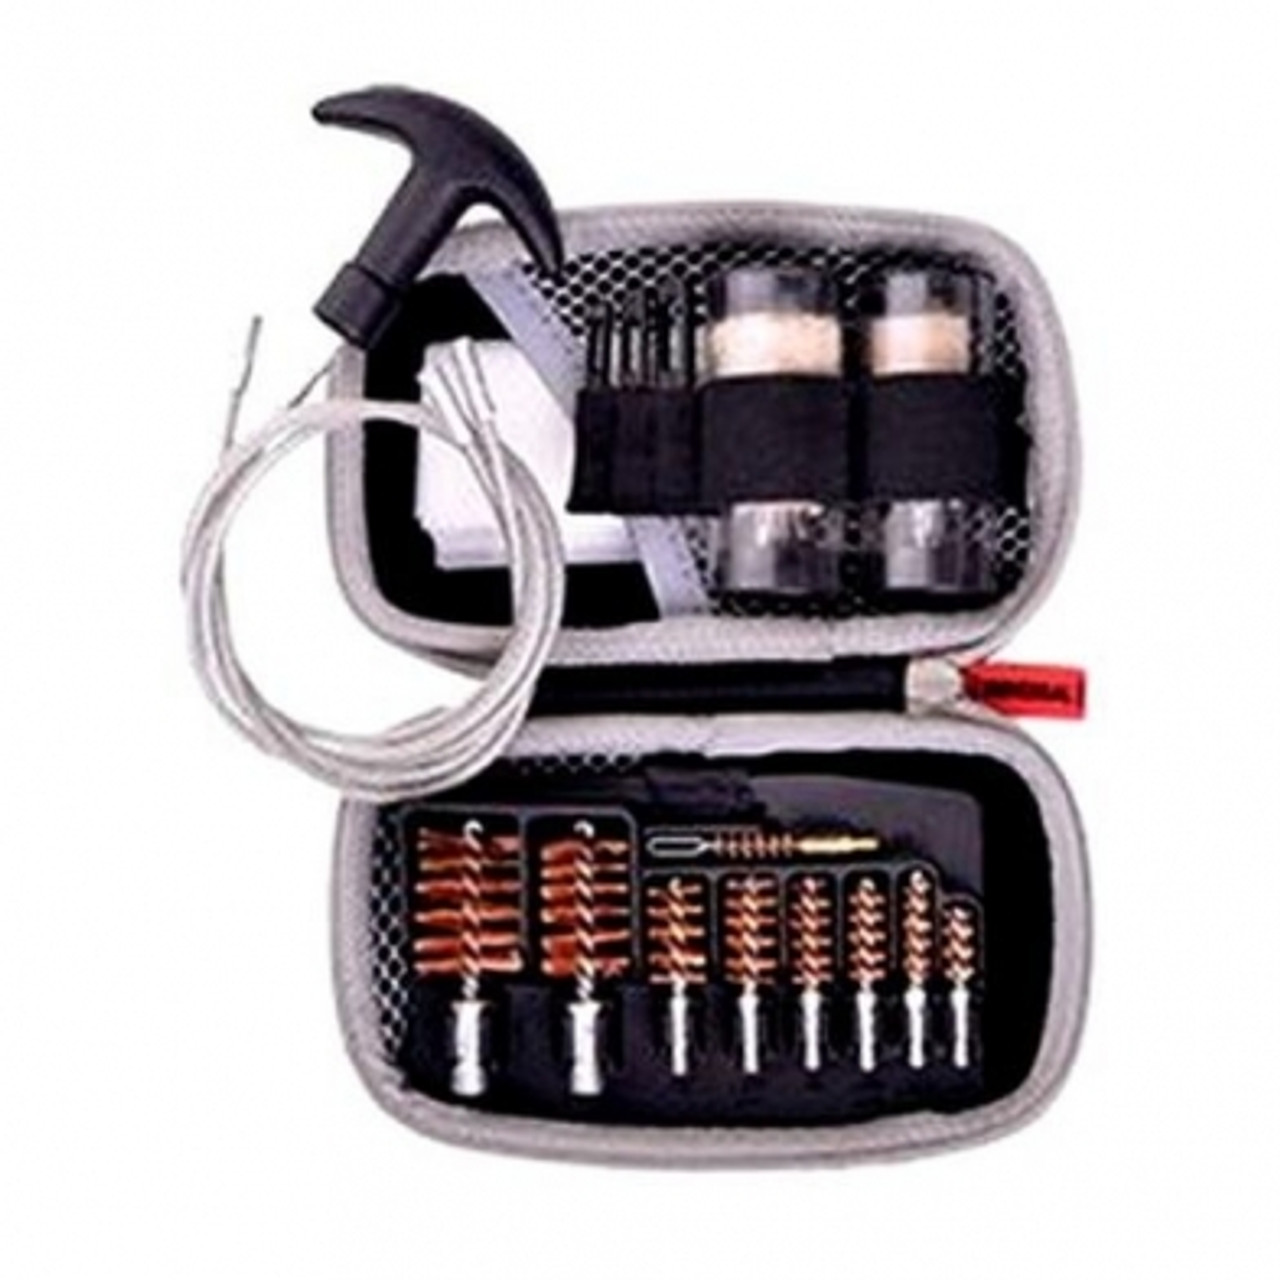 Designed by experienced shooters, the premium components of Gun Boss Universal Cable Kit is neatly organized in a compact, weather-resistant, molded case. The kit has the ideal assortment of brushes, jags, mops and slotted tips for most firearms. Ideal for bench cleaning but made compact and rugged for field use. Non-marring nylon slotted tips, phosphor bronze brushes and coated steel cables all work together to keep your guns clean. The kit includes 34" and 9" flex rod, .17 cal. brush/slotted tip combo, 20 and 12 ga. shotgun mops and brushes, .45 cal., .357/.38/9mm, .30 cal., .270 to .280/7mm, .22 to .223/5.56mm, and .22 cal. short-action brushes, T-handle, three non-marring nylon slotted tips, large and small thread adapters, 25 shotgun patches, and 25 rifle/handgun patches.
Type:	Cleaning System
Size:	Universal
Pieces:	17
Bristle Type:	Bronze, Nylon
Length:	Various
Includes:	Cable/Brushes/Swabs/Handle/Storage
Caliber or Gauge:	Multi-Caliber
Model:	REA-AVGCK310-U